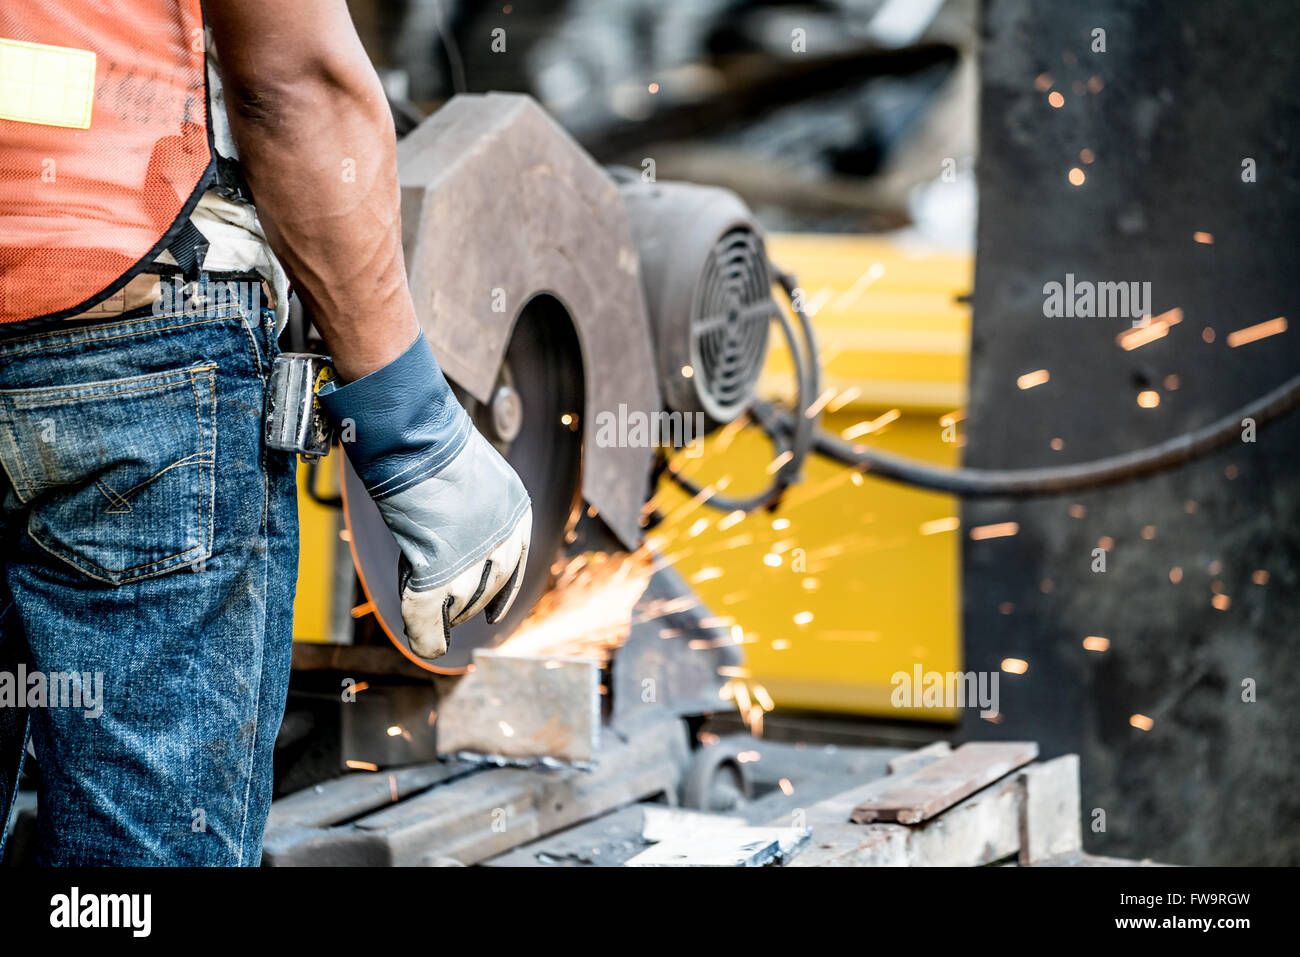 Technician or mechanic using metal grinder in factory, manufacturing industry concept Stock Photo